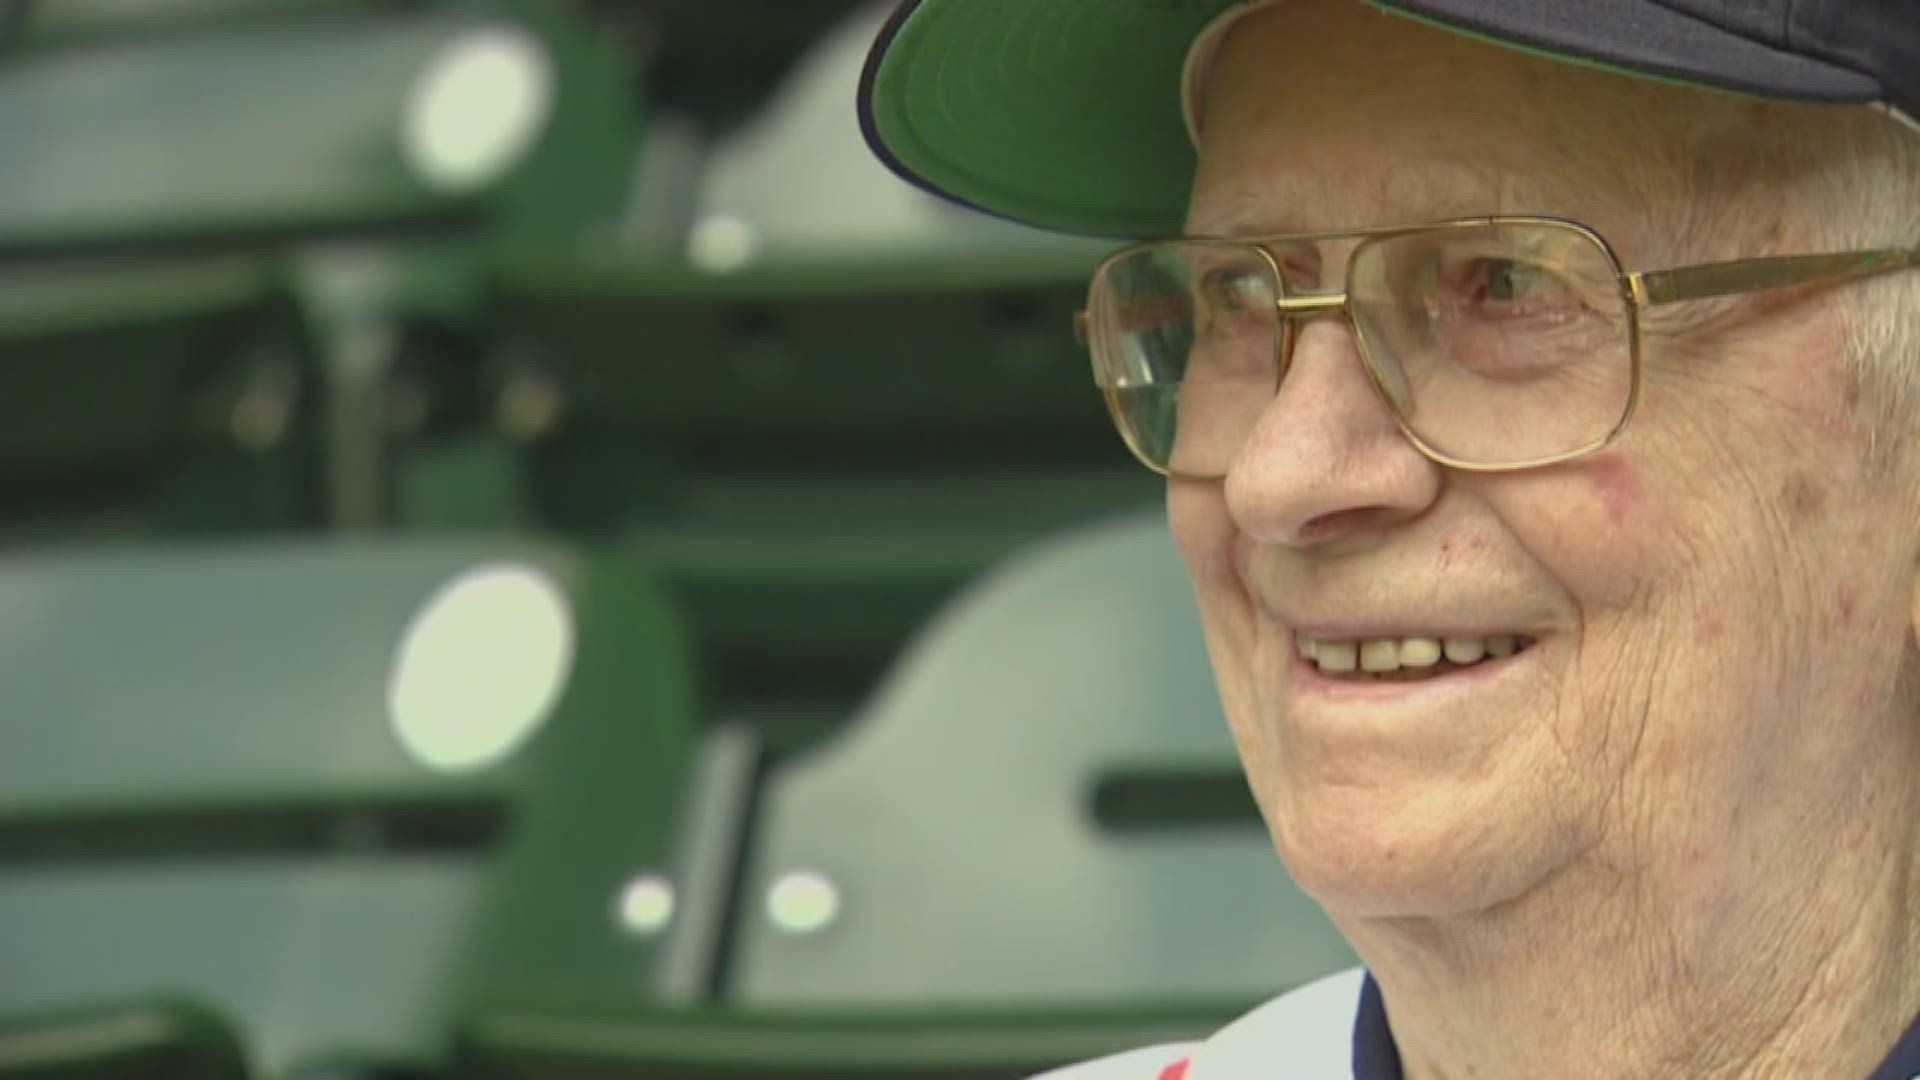 A 93-year-old Astros super fan reflects on his history with baseball ahead of Opening Day.